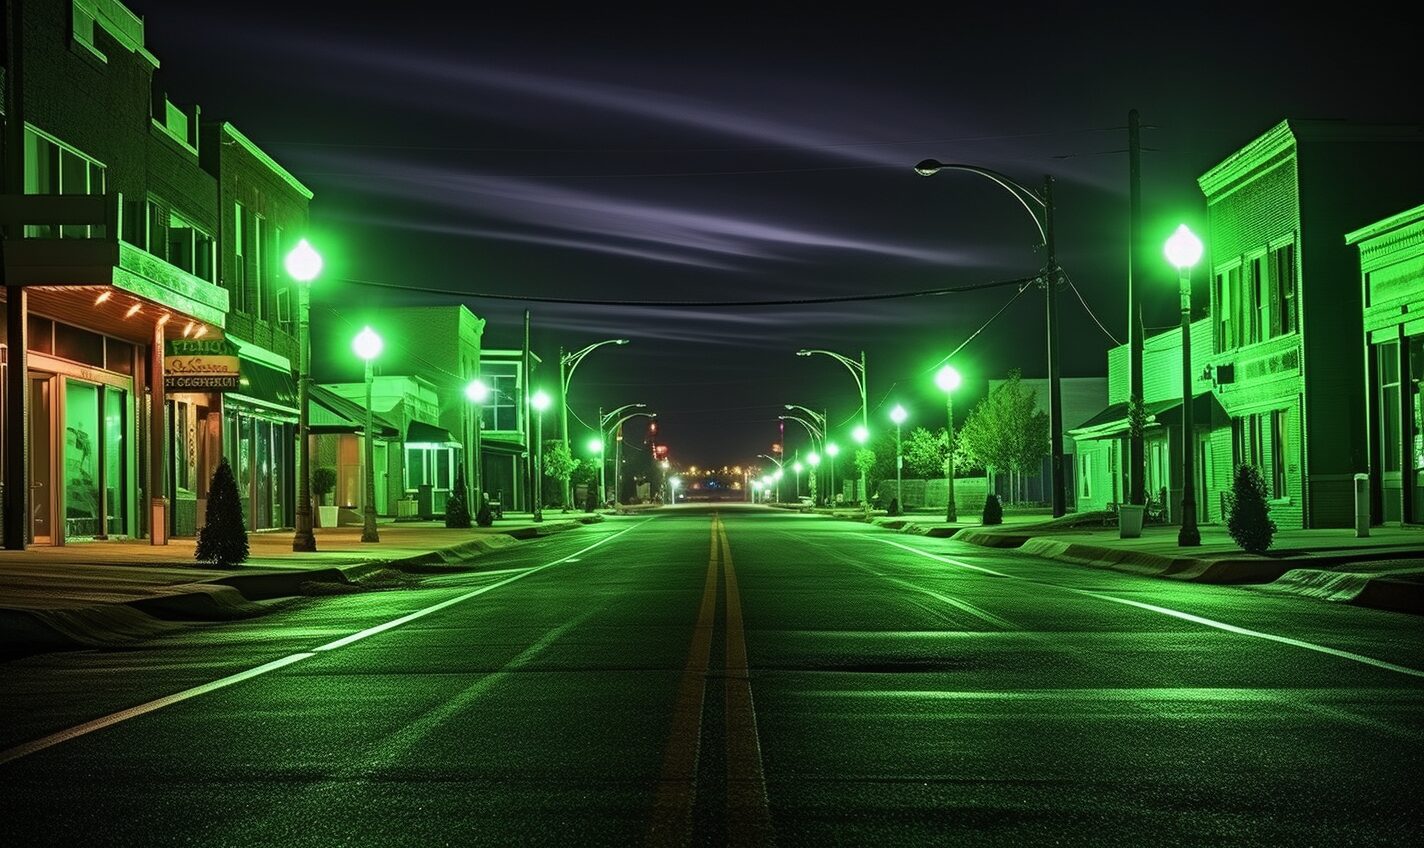 clarskville, tennessee in a black and neon green glow